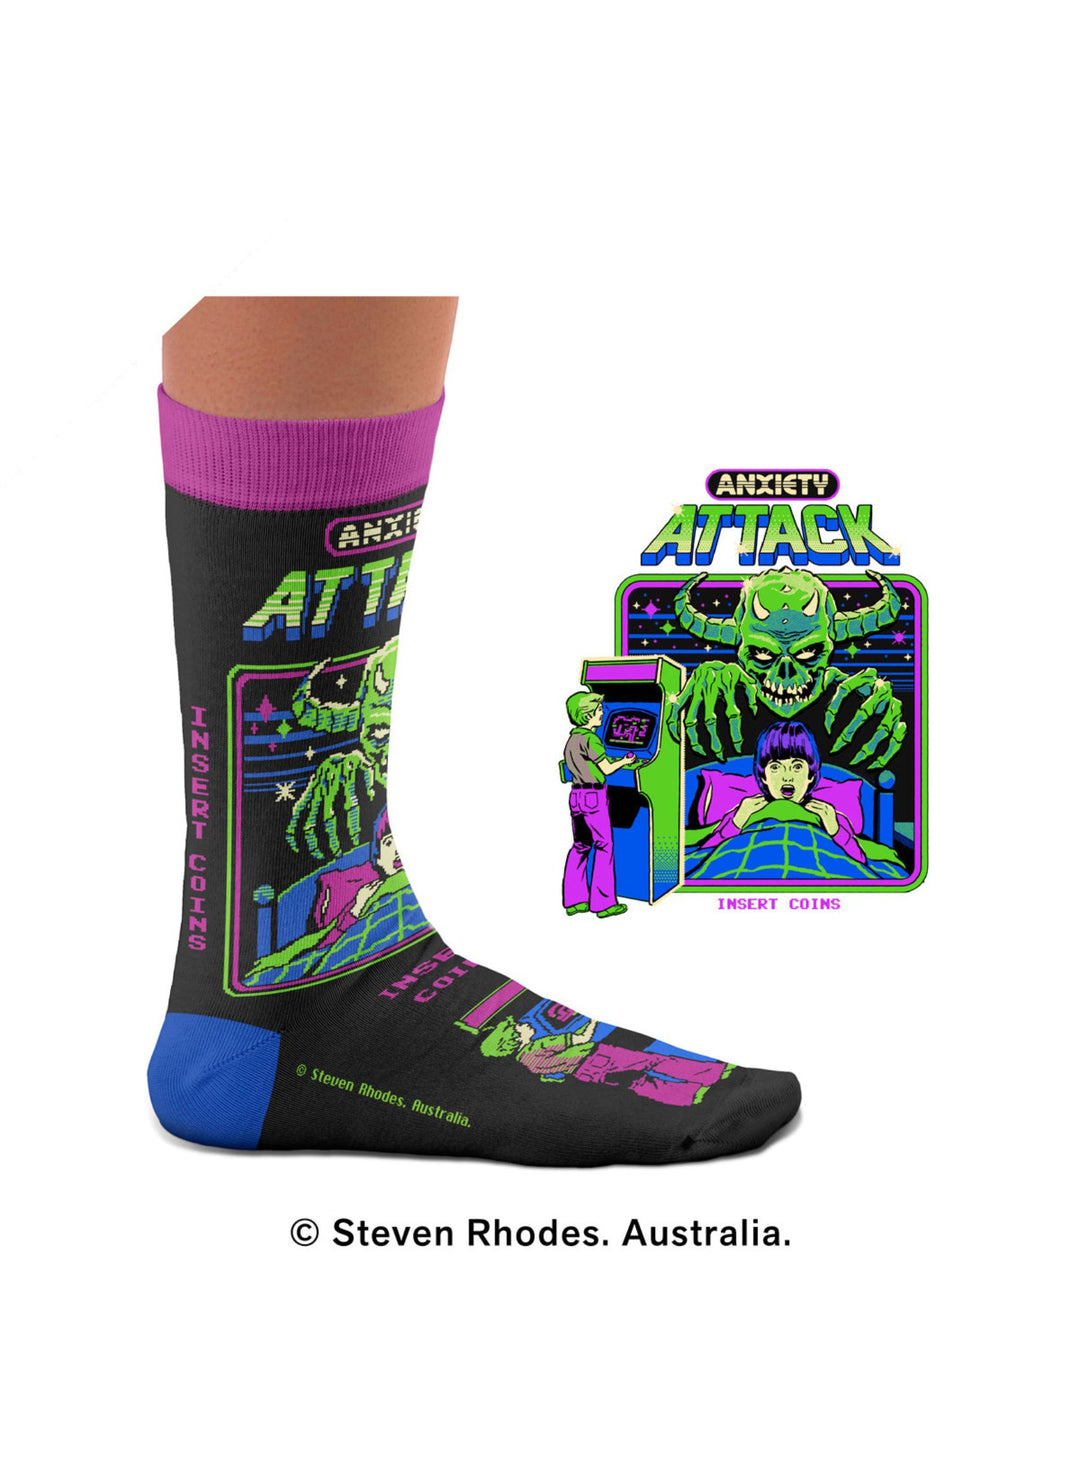 Chaussettes Anxiety Attack, Steven Rhodes